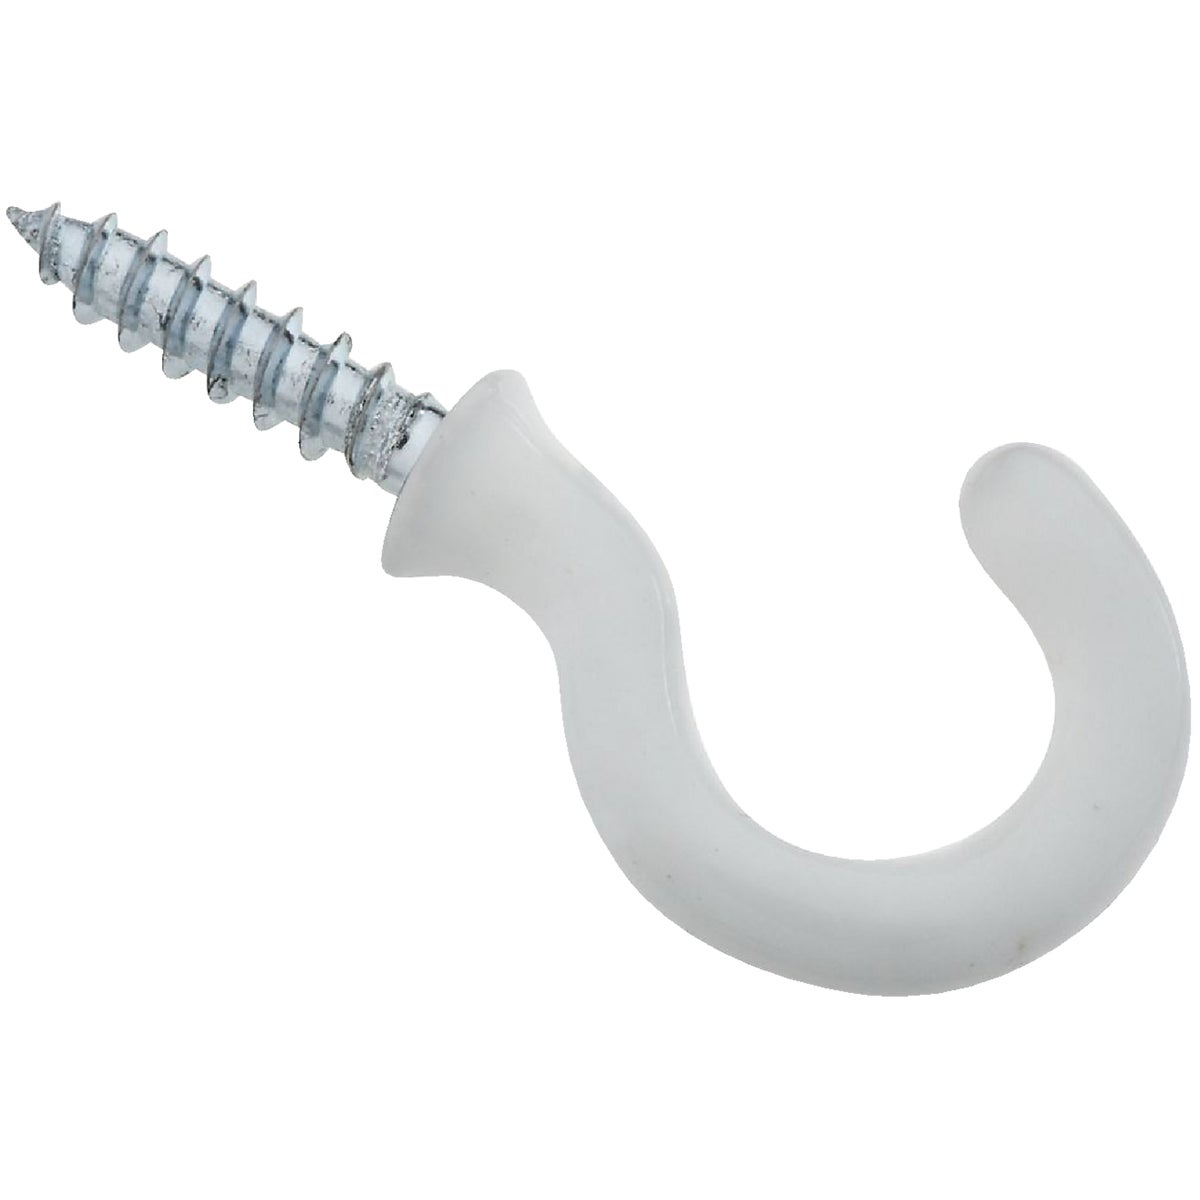 National 3/4 In. White Vinyl Cup Hook (50 Count)